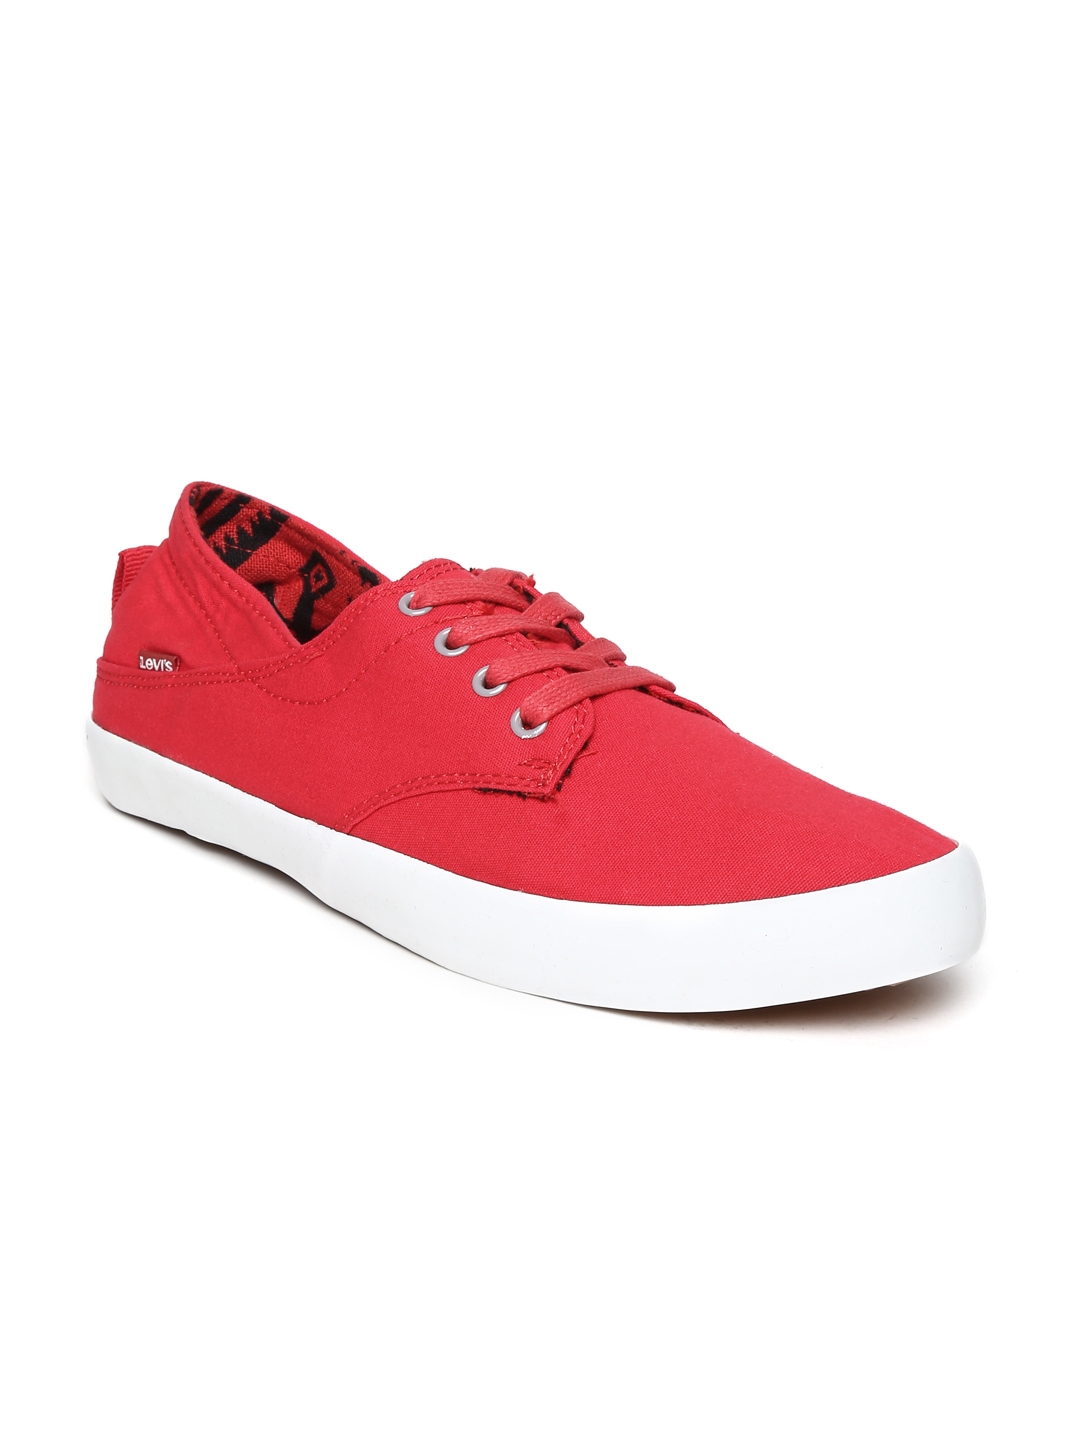 Buy Levis Men Red Casual Shoes - Casual Shoes for Men 756930 | Myntra